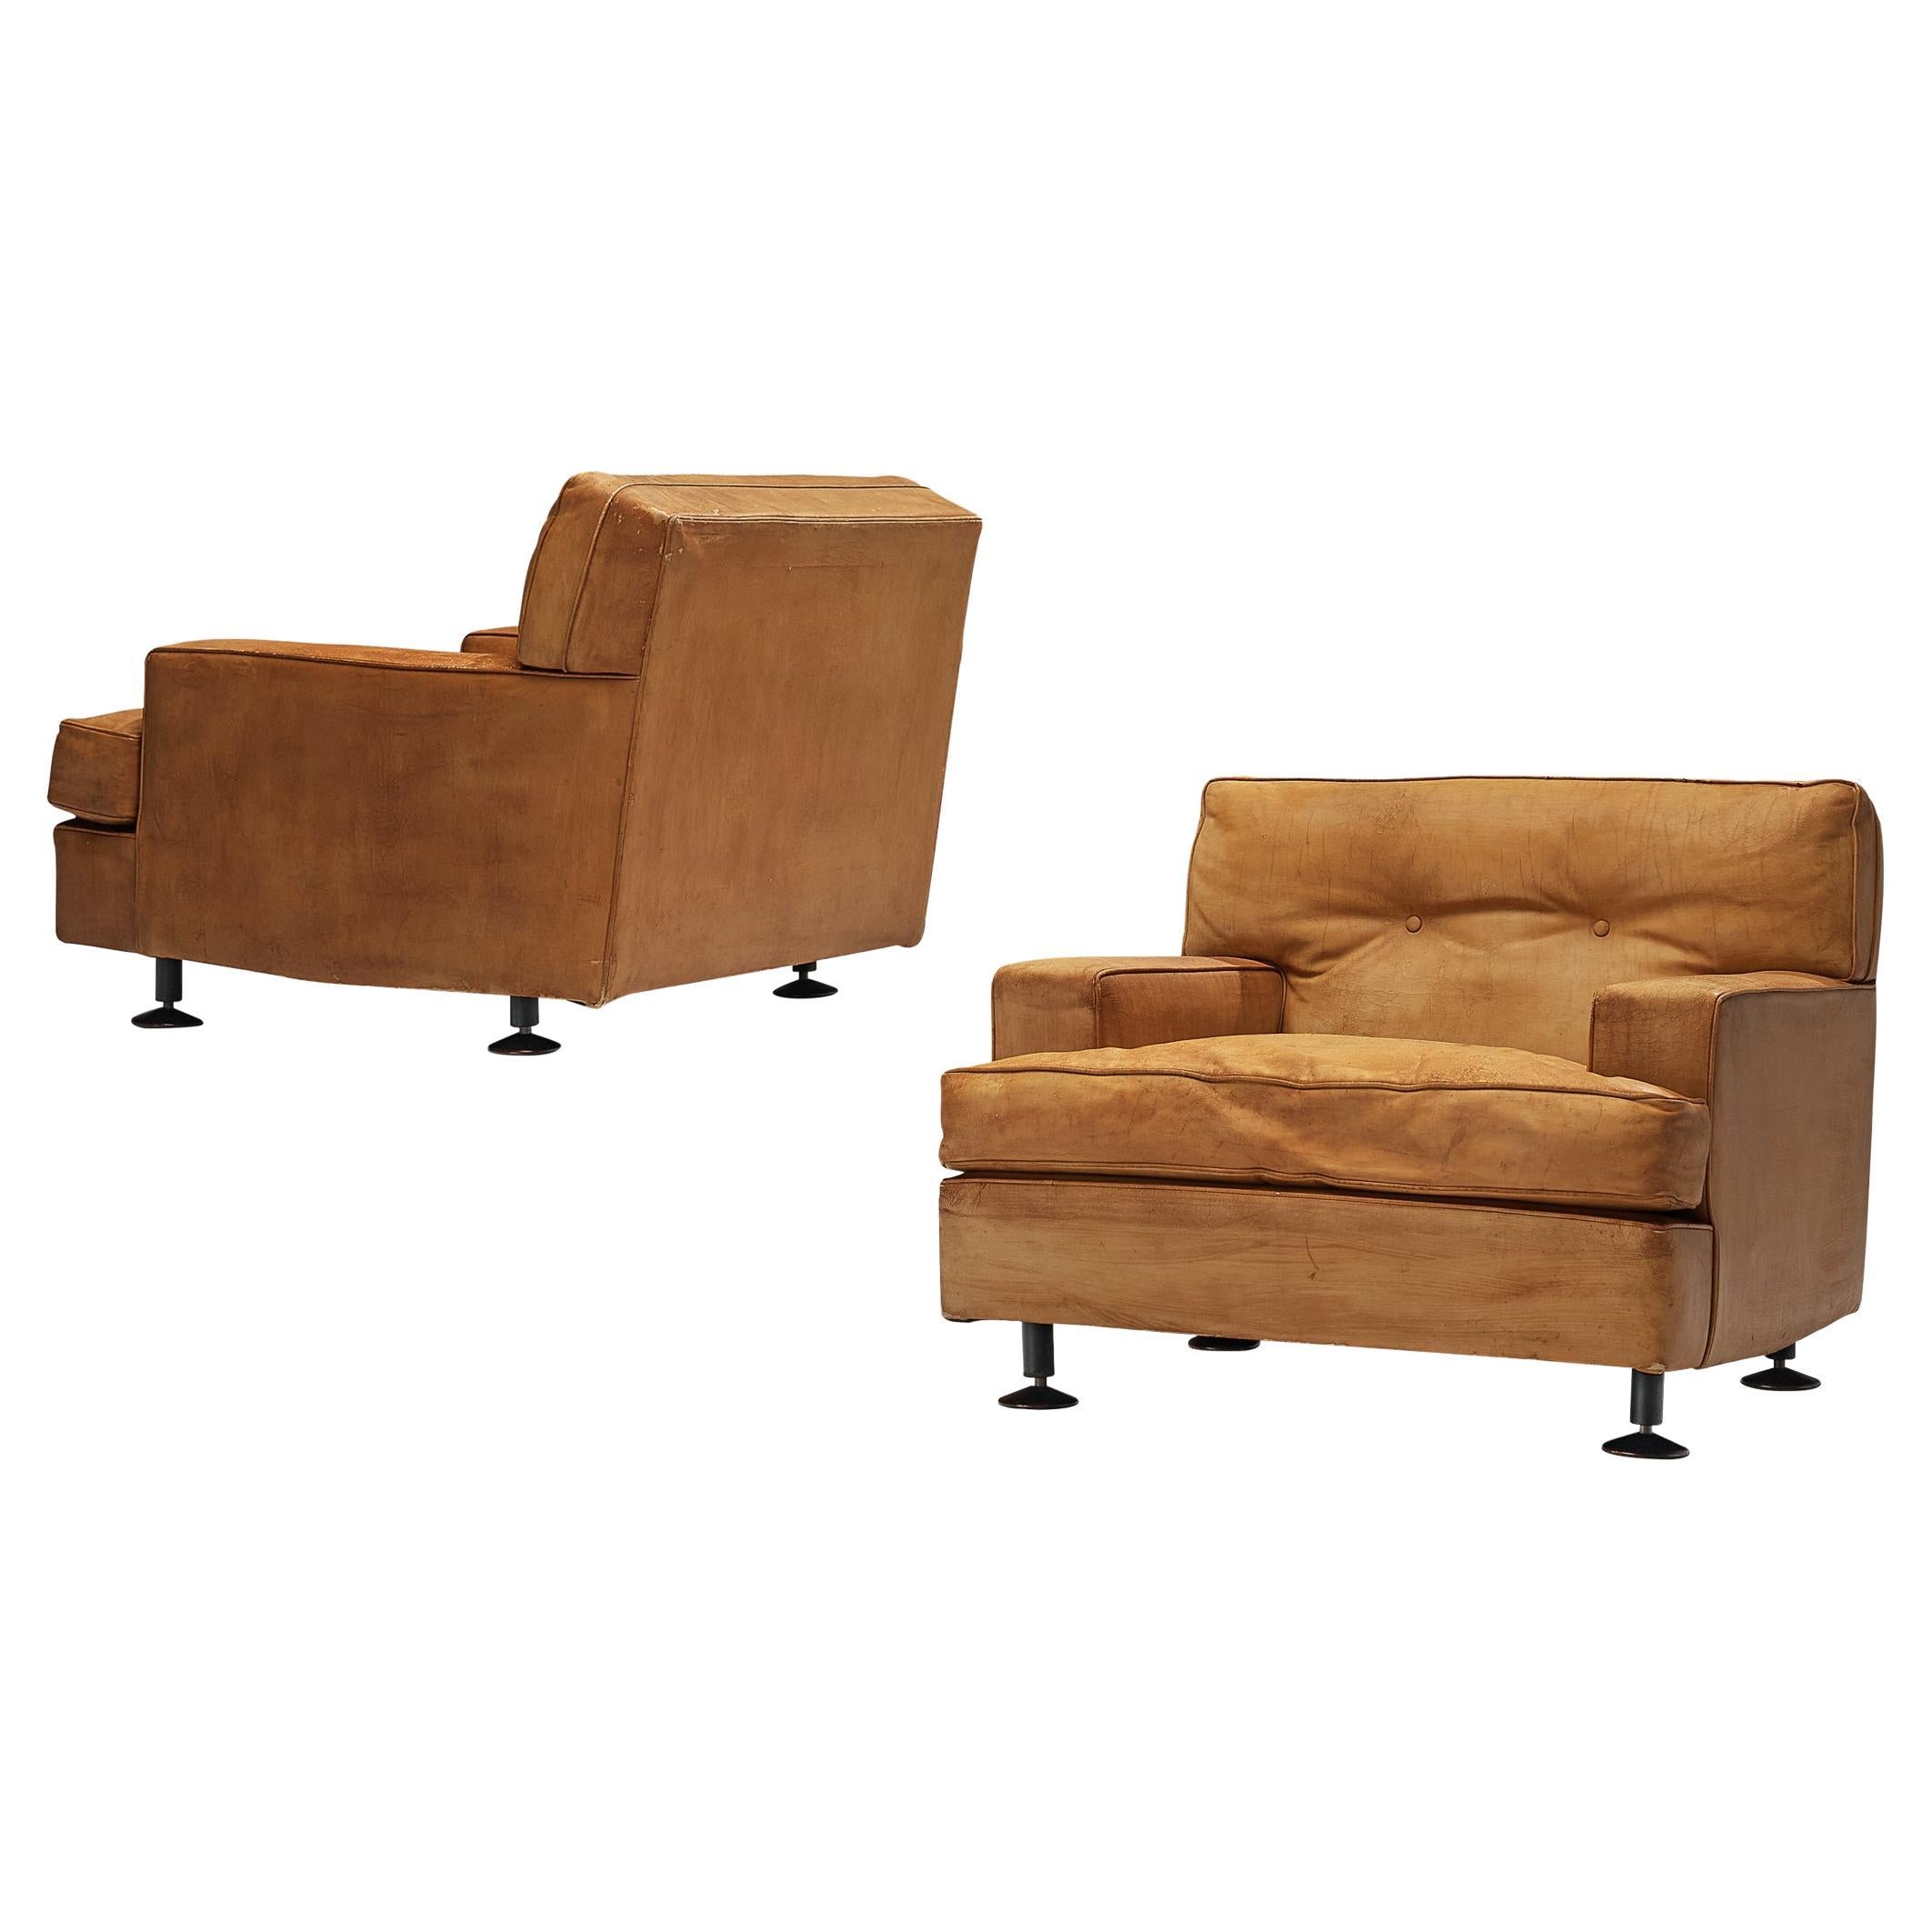 Marco Zanuso for Arflex Pair of ‘Square’ Lounge Chairs in Cognac Leather